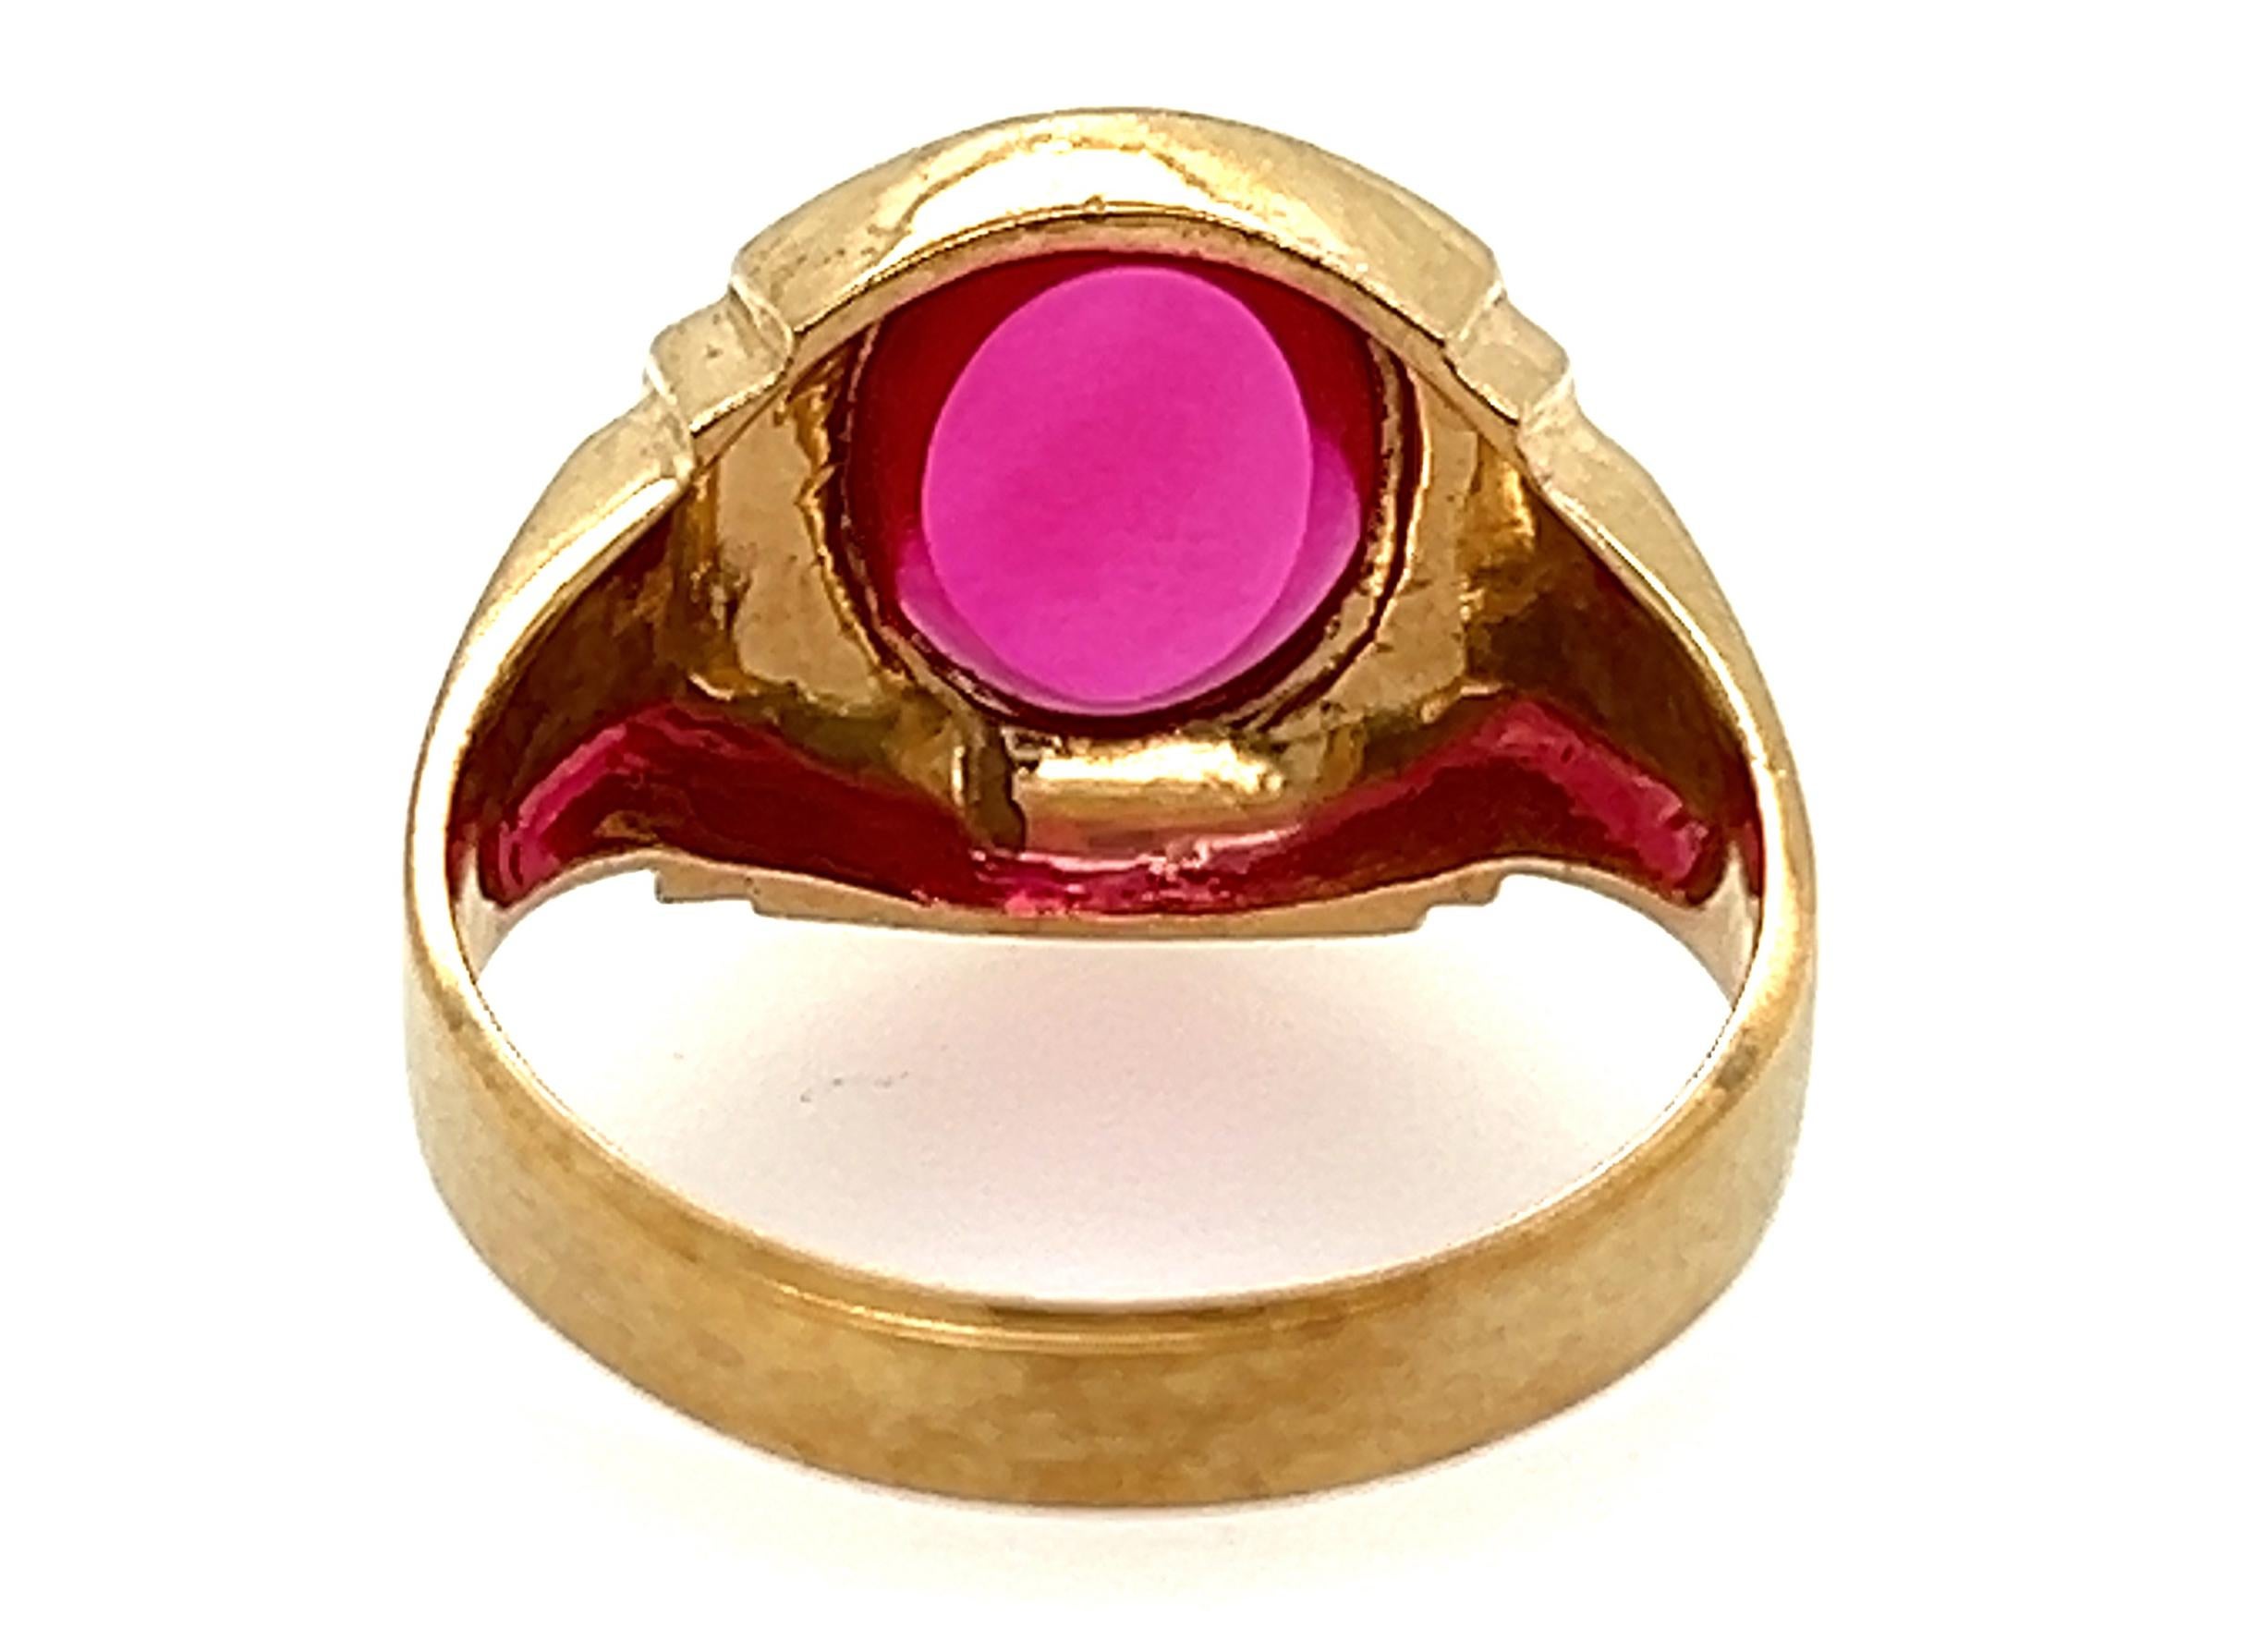 NOS Retro Ruby Mens Cocktail Ring Yellow Gold Antique Original 1940-1950 In New Condition For Sale In Dearborn, MI